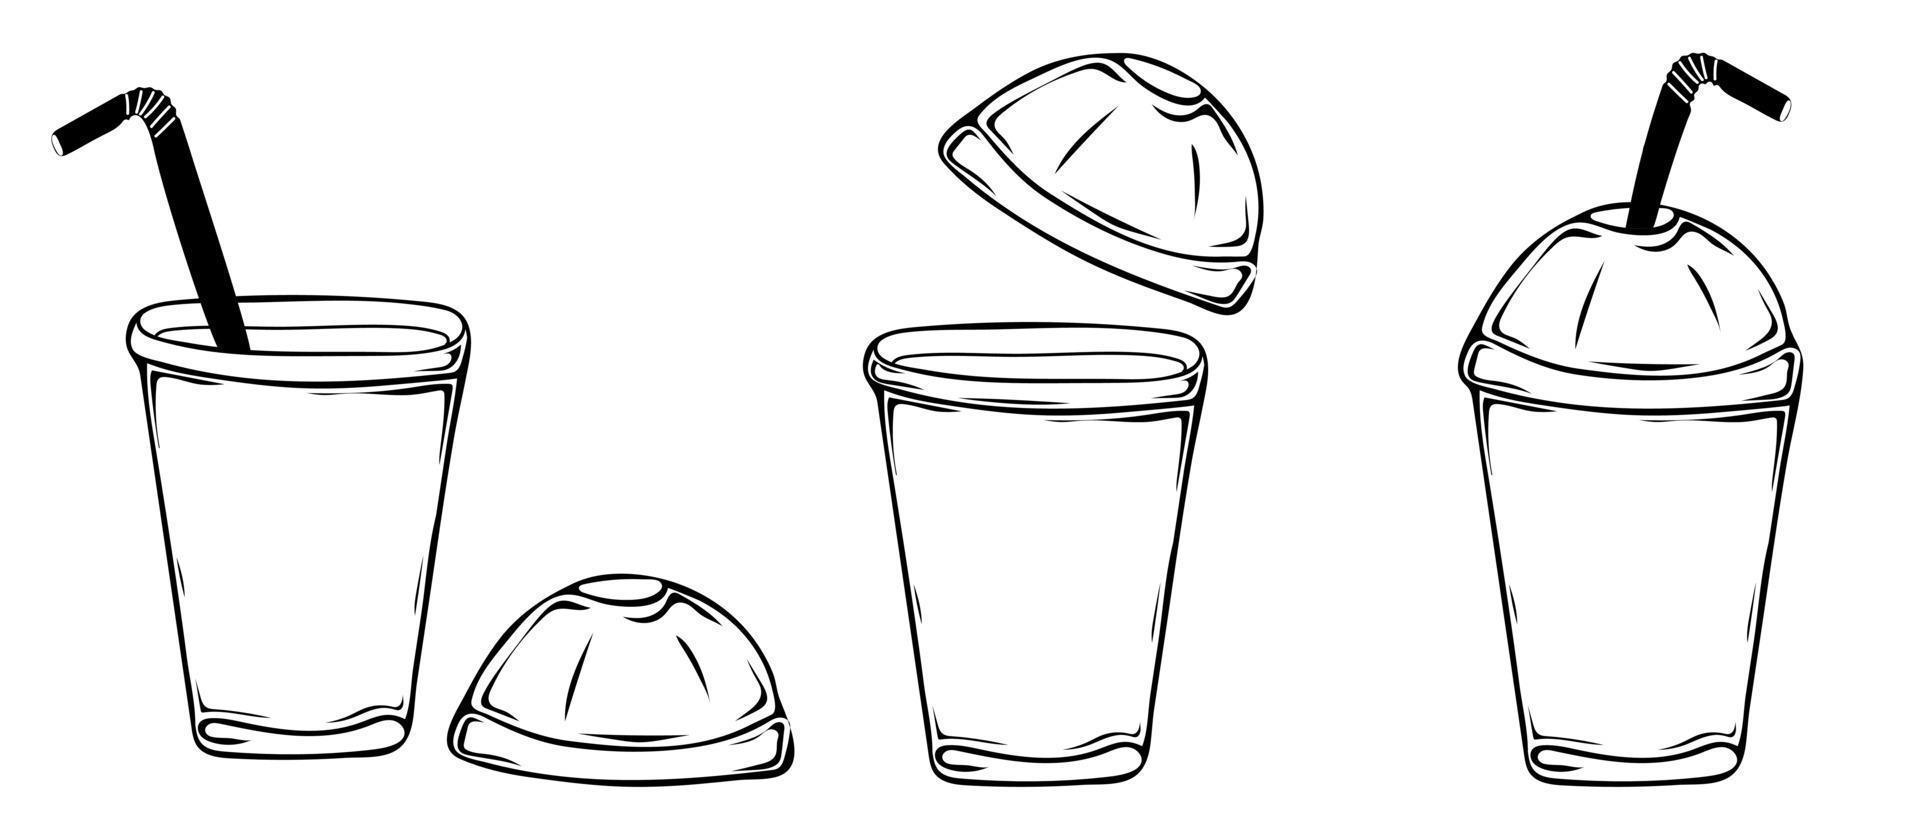 https://static.vecteezy.com/system/resources/previews/016/125/391/non_2x/set-of-empty-hand-drawn-glasses-for-smoothie-vector.jpg